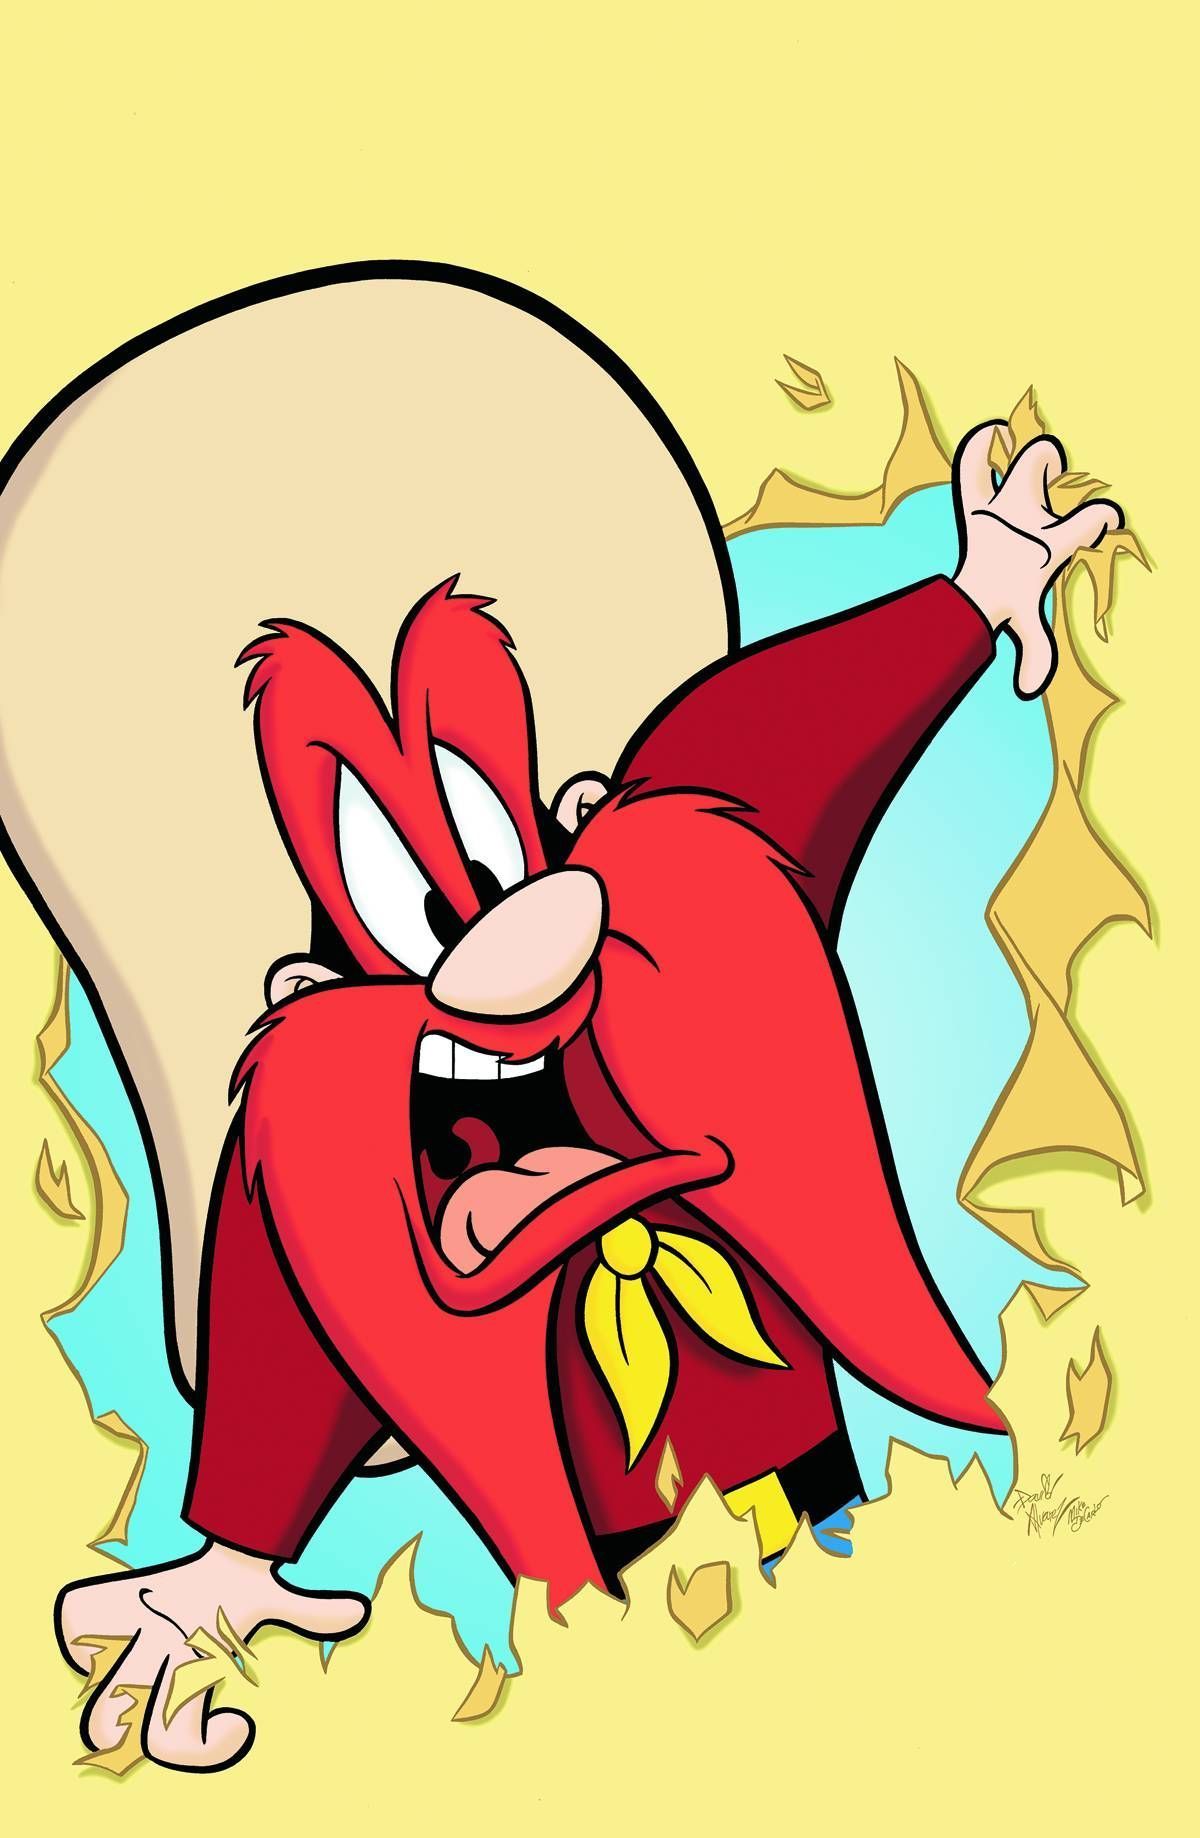 Yosemite Sam, the fastest gun in the West, is on a mission to take over the town of Tumbleweed Flats. - Looney Tunes